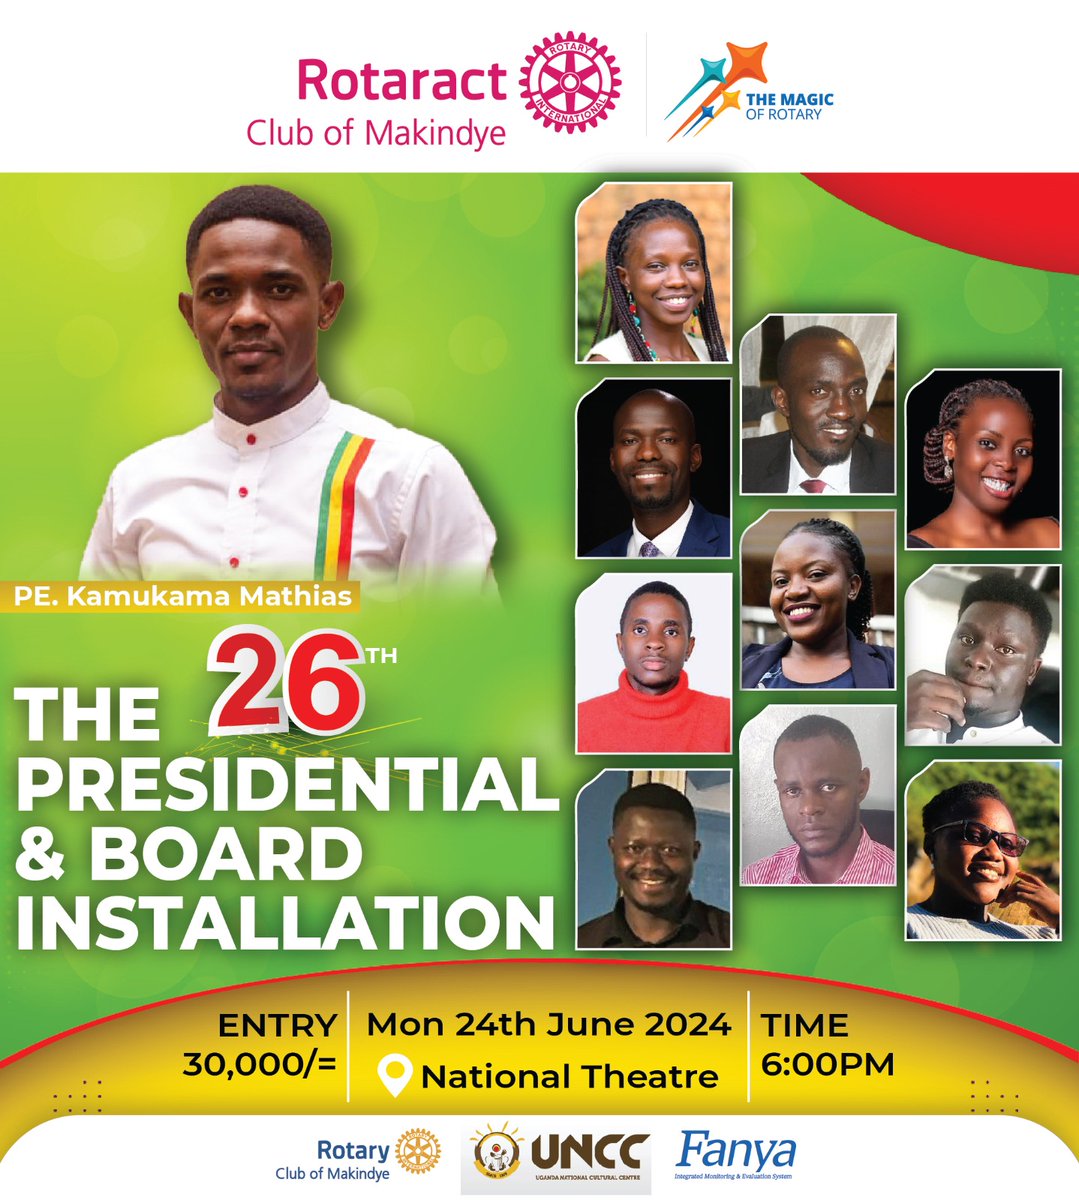 The Mankind switches Leadership peacefully🎊🎉. Comrades,mark your calenders for 24th June is the day to witness Magical🪄 at the National theatre, 6pm @ only 30,000/= Red❤️Yellow💛Green💚. Band🥁🎹🎤🎷🪘, cocktails 🍸🥃🍹& a theatrical experience🏛️ #WeAreTheMankind#FlyBeyond.